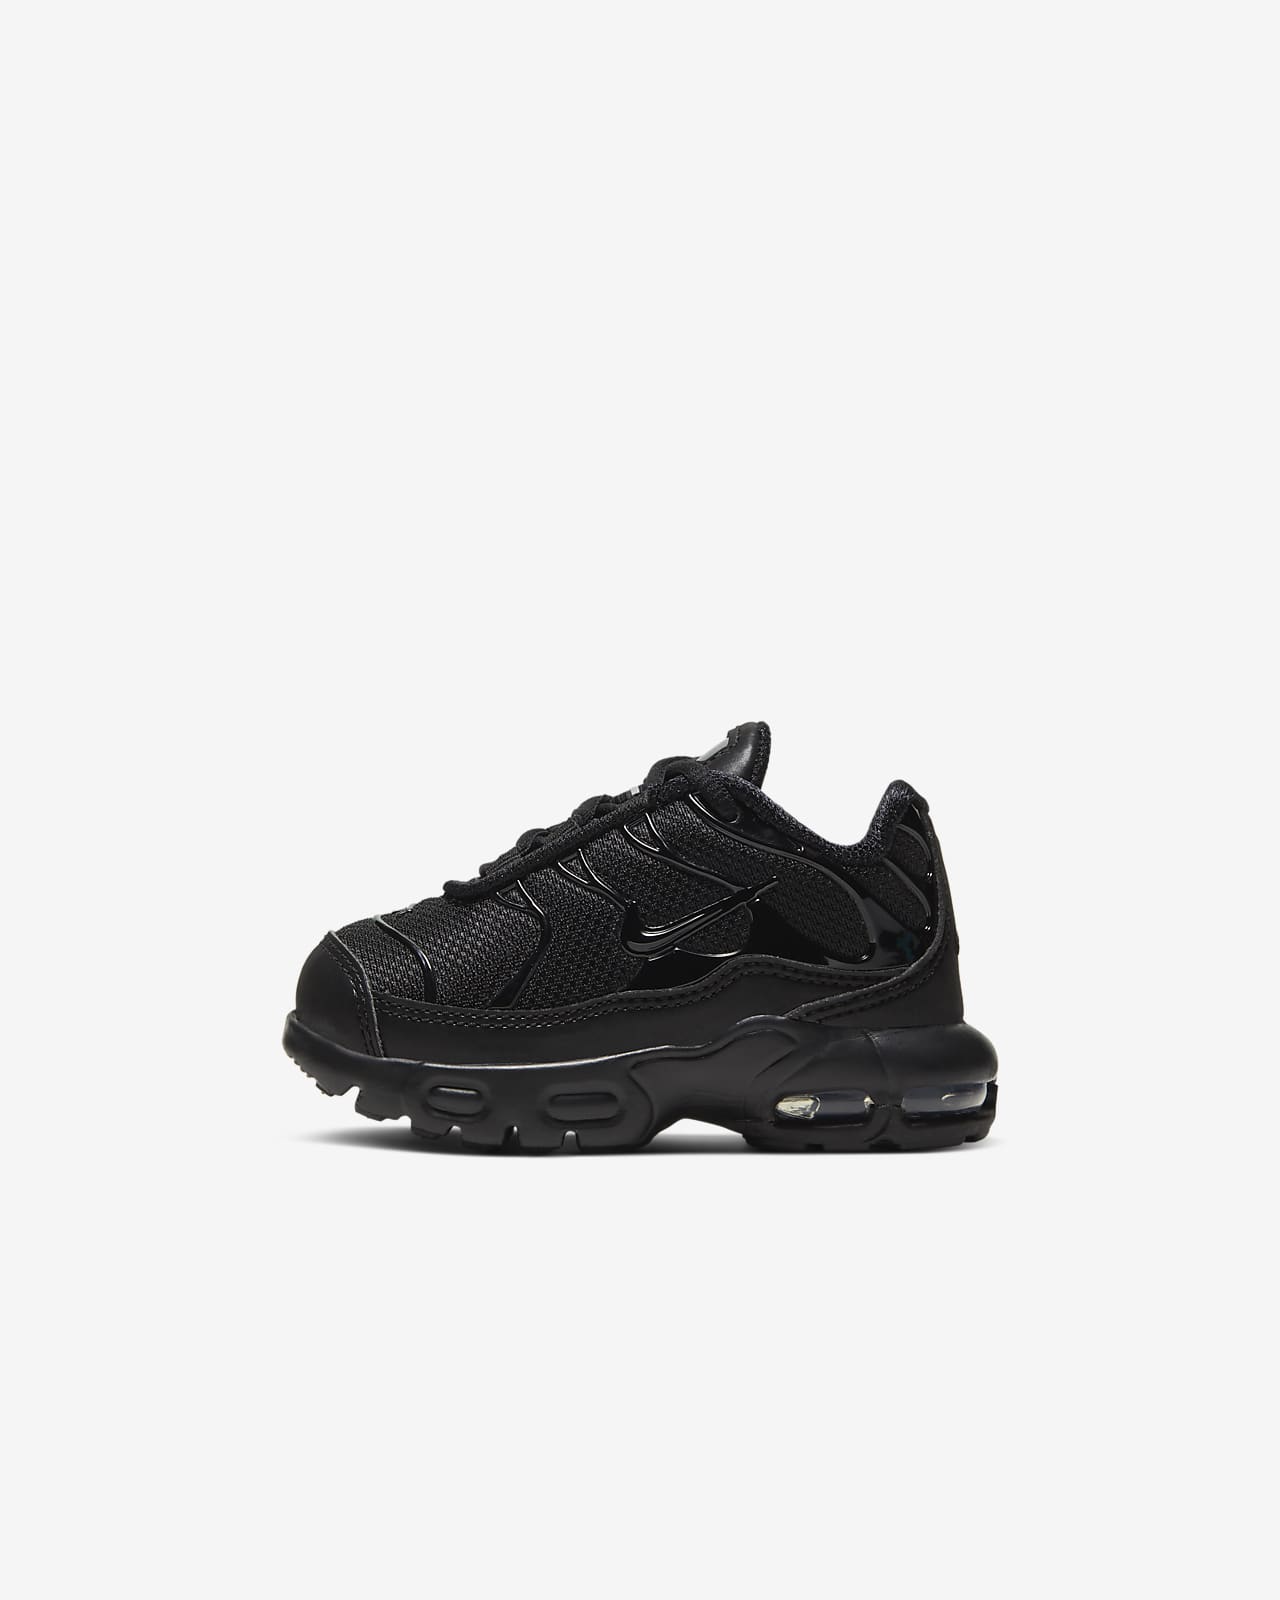 Nike Air Max Plus Baby and Toddler Shoe